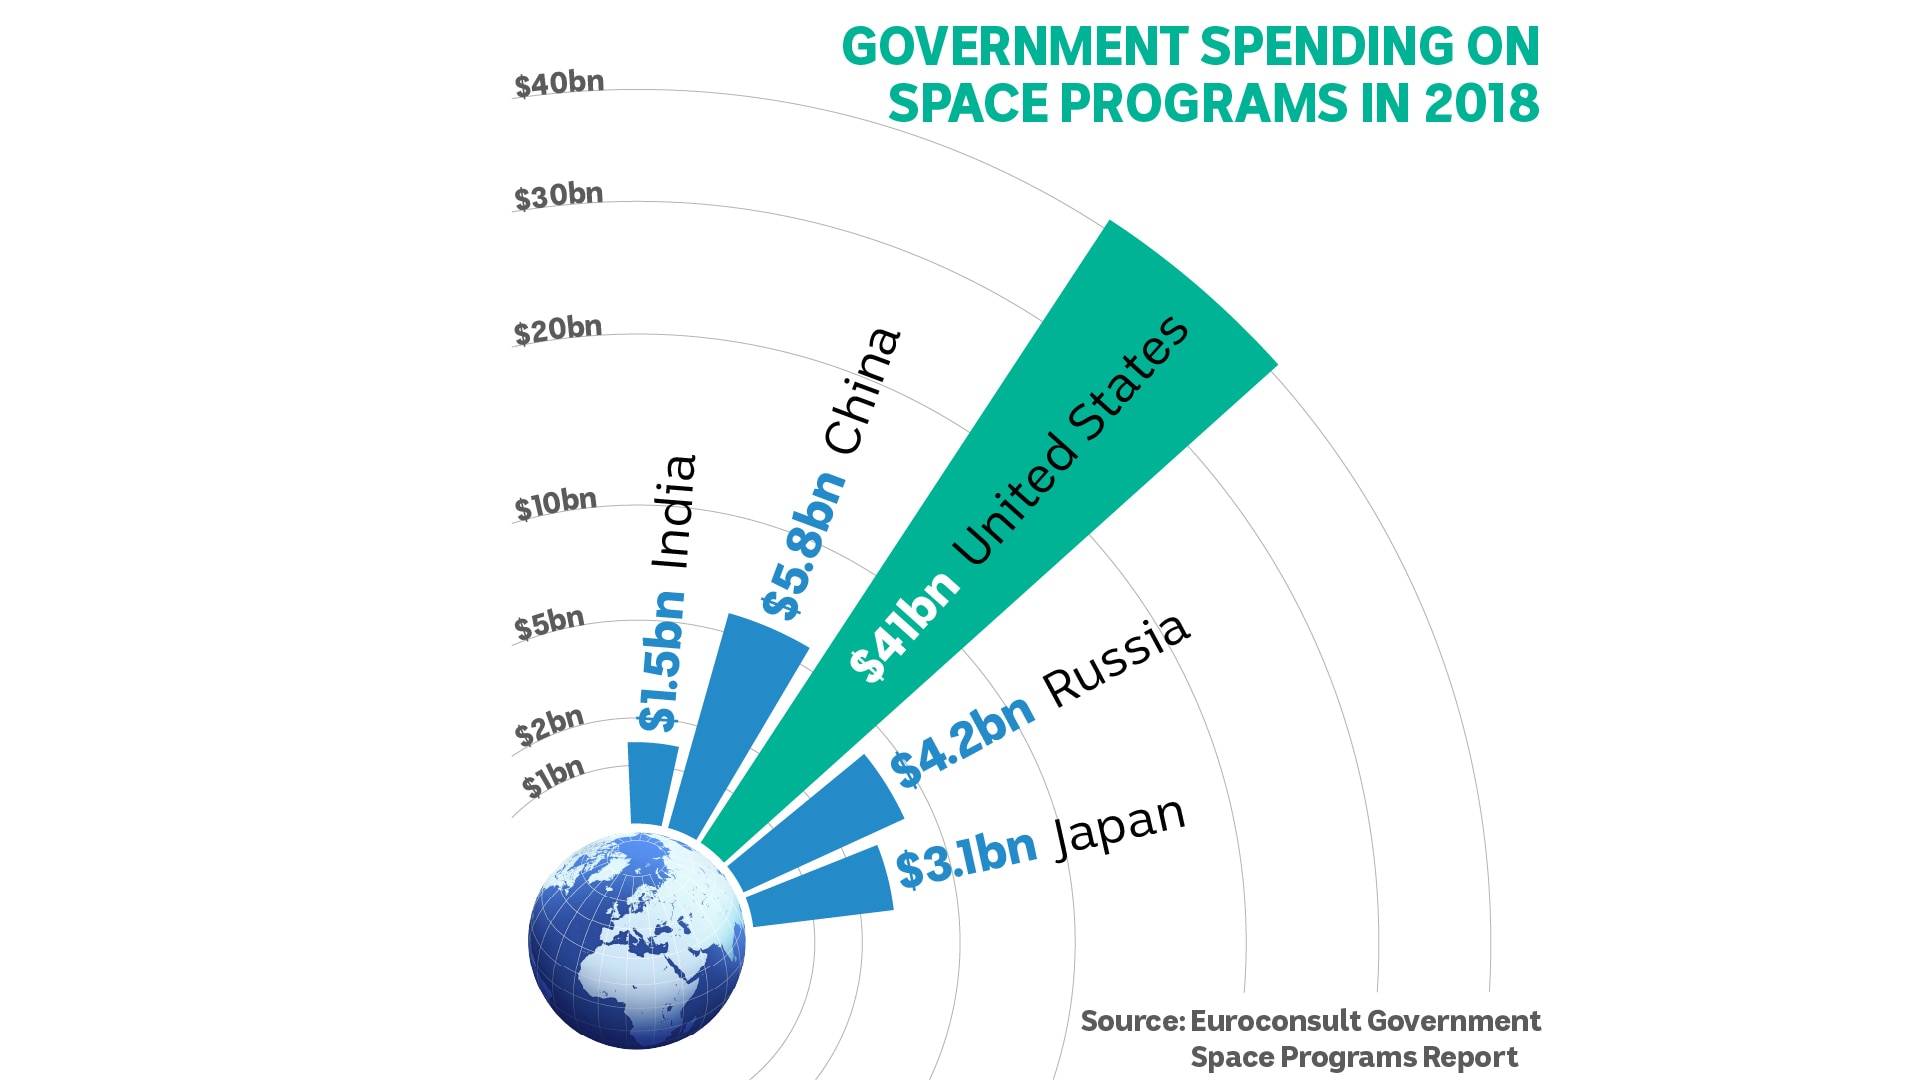 An illustration showing government spending on space programs in 2018.